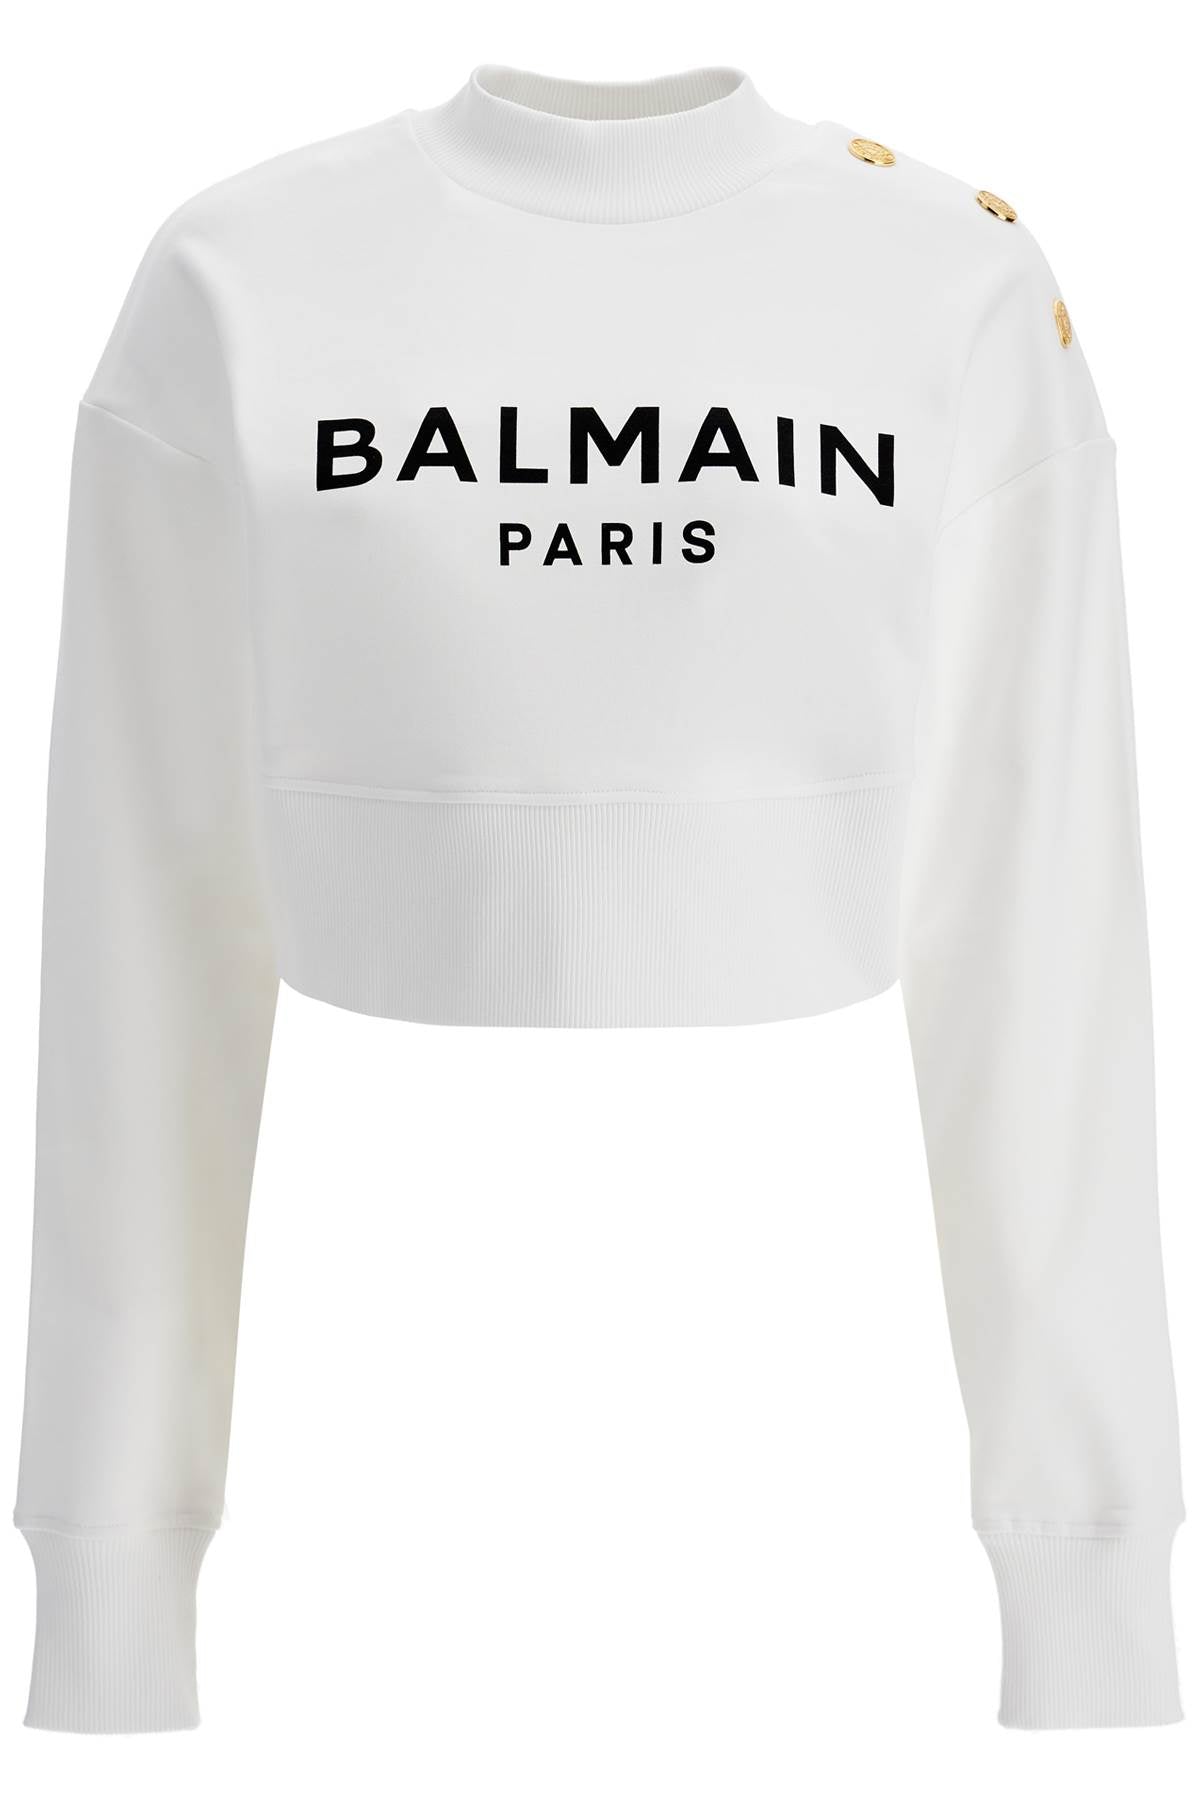 BALMAIN CROPPED SWEATSHIRT WITH BUTTONS